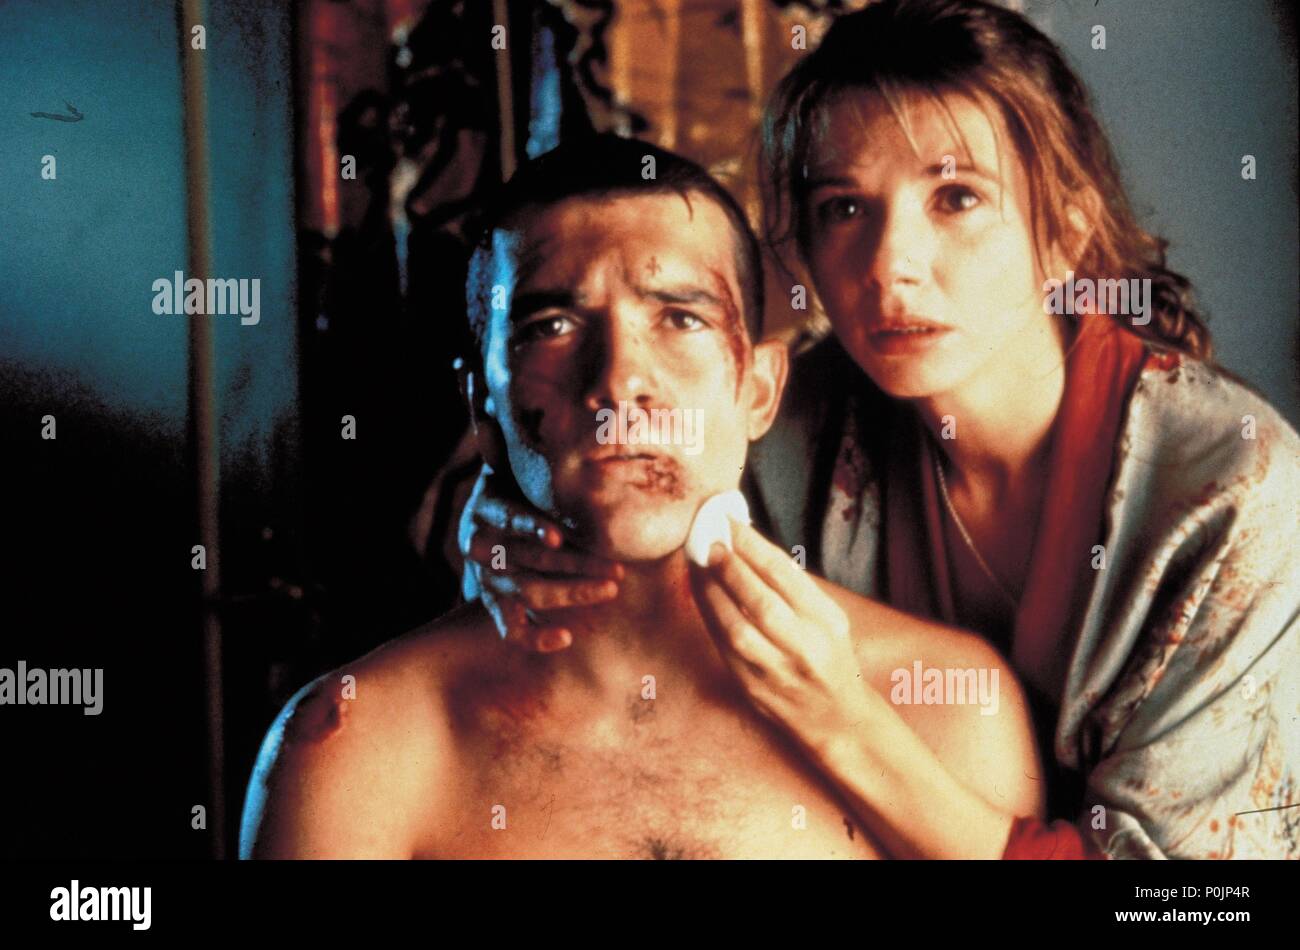 Original Film Title: ATAME!. English Title: TIE ME UP! TIE ME DOWN!. Film  Director: PEDRO ALMODOVAR. Year: 1989. Stars: VICTORIA ABRIL; ANTONIO  BANDERAS. Copyright: Editorial inside use only. This is a publicly